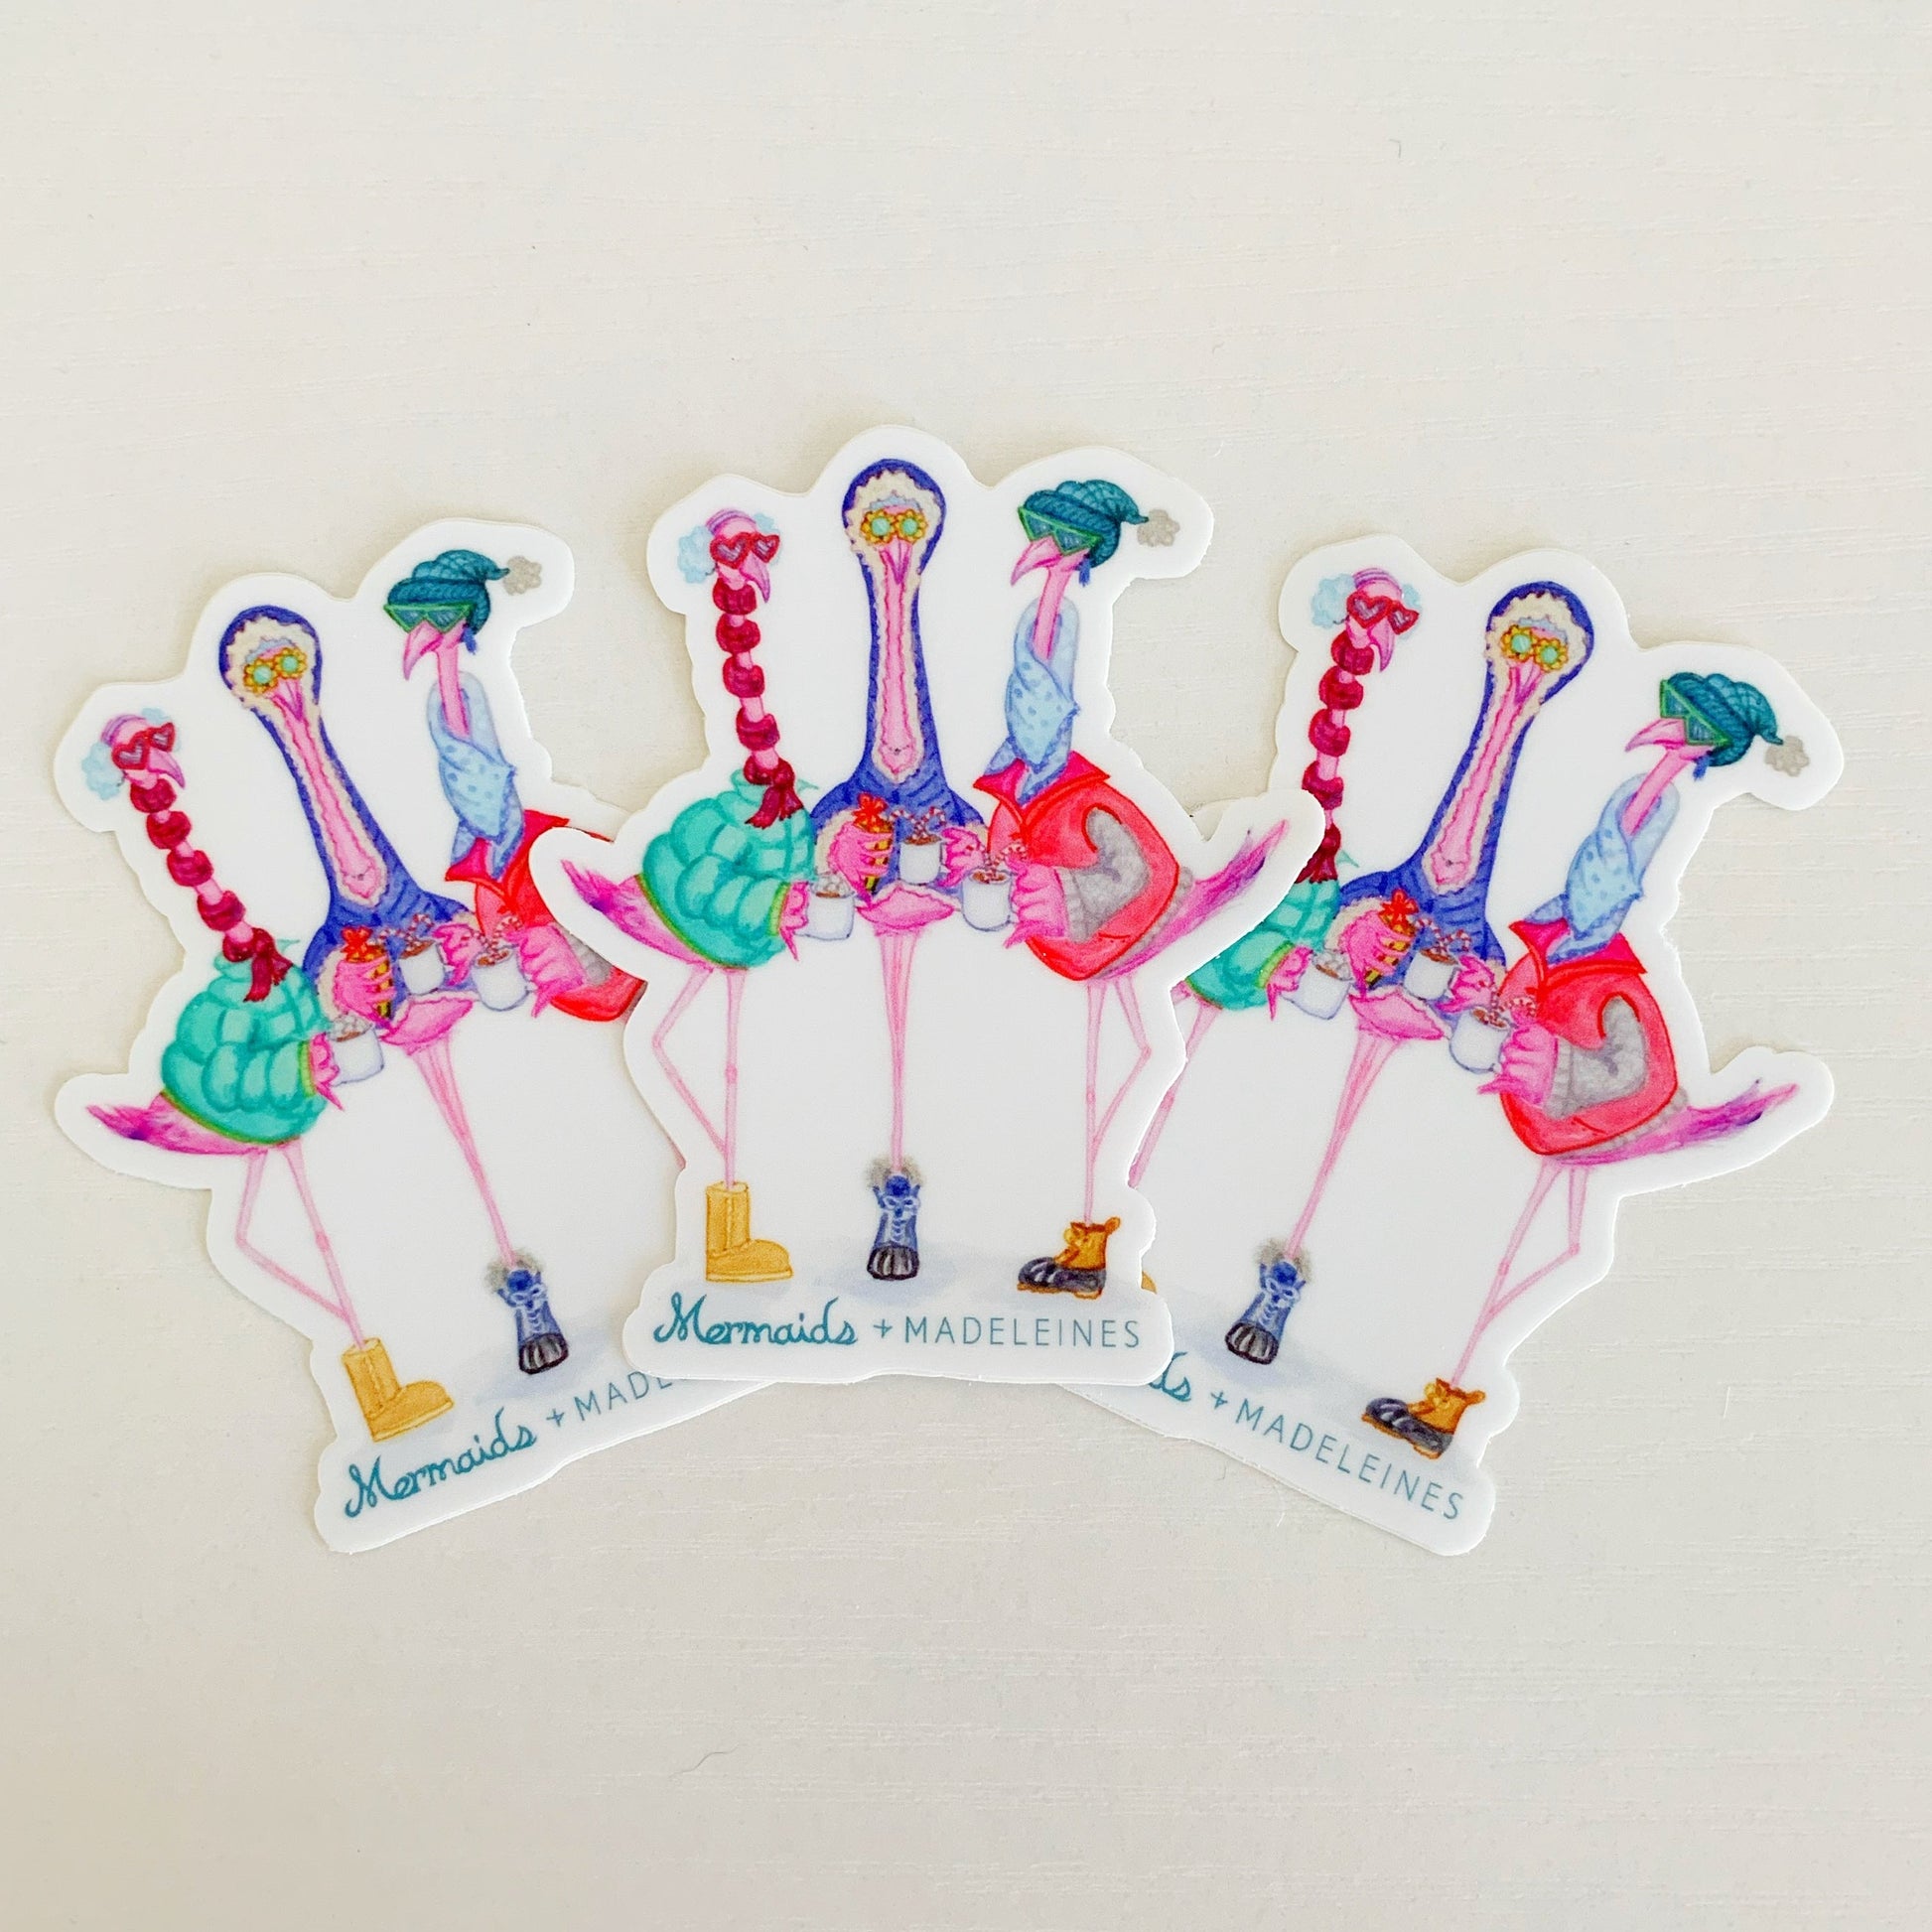 3 pack of winter flamingal vinyl stickers. the stickers are all the same. the sticker is an illustration of 3 flamingos dressed in winter wear, the artist is Heather Auclair Welch. this set of 3 stickers is photographed on a white surface